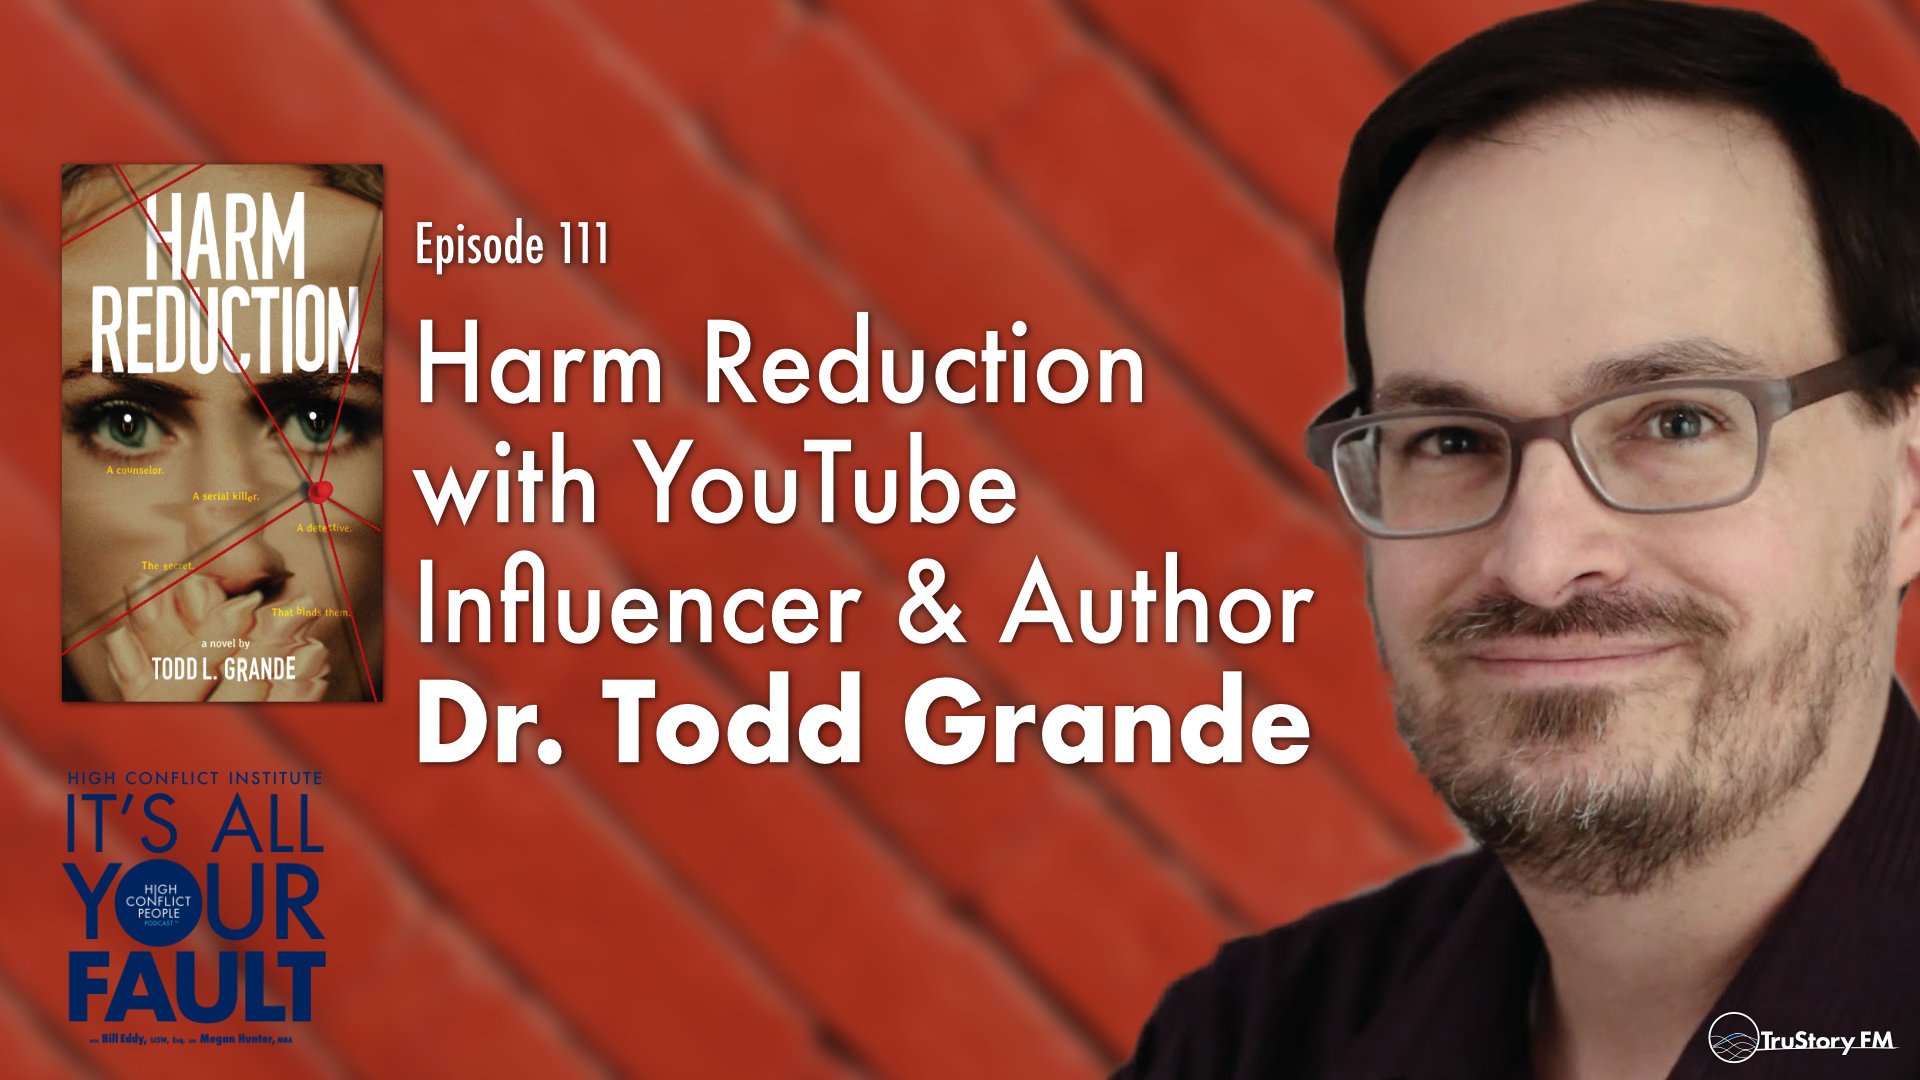 Harm Reduction with YouTube Influencer and Author Dr